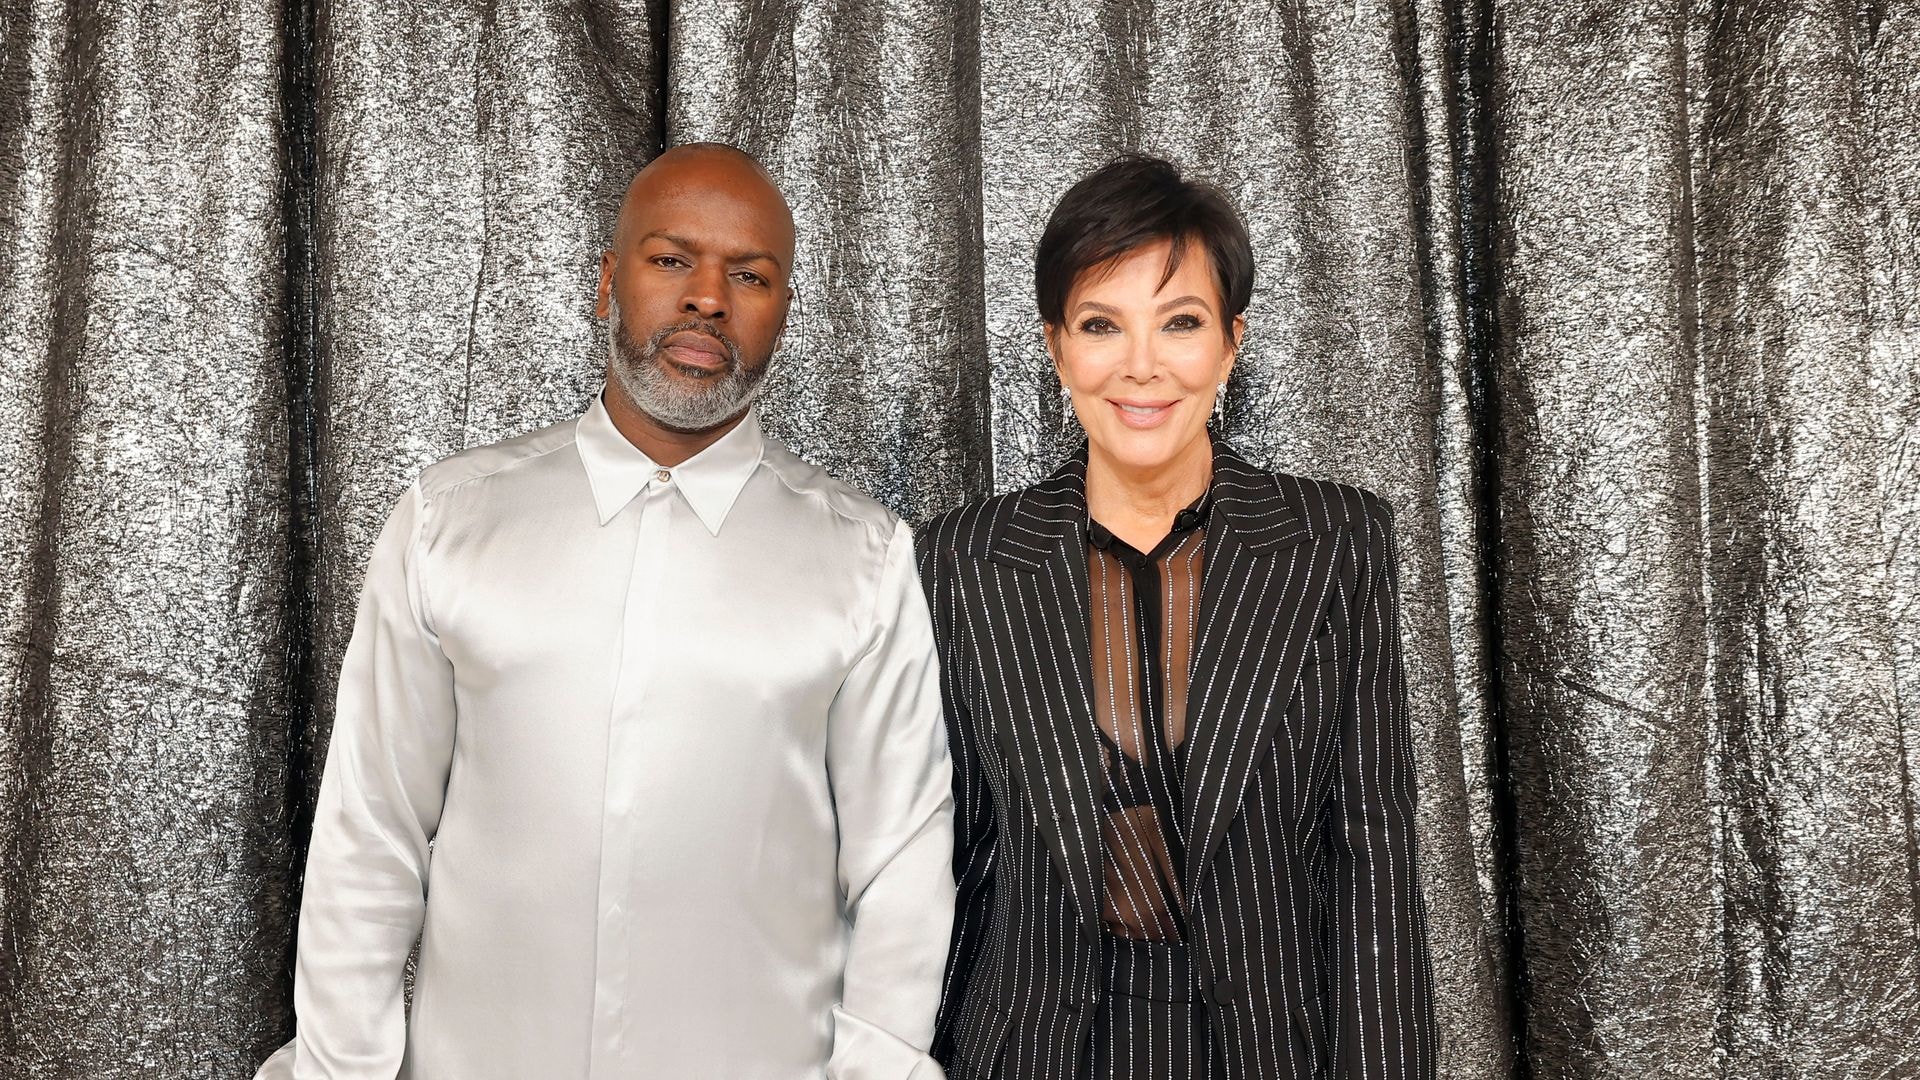 Kris Jenner, 68, praised as ‘ageless’ as she steps out with partner Corey Gamble, 43